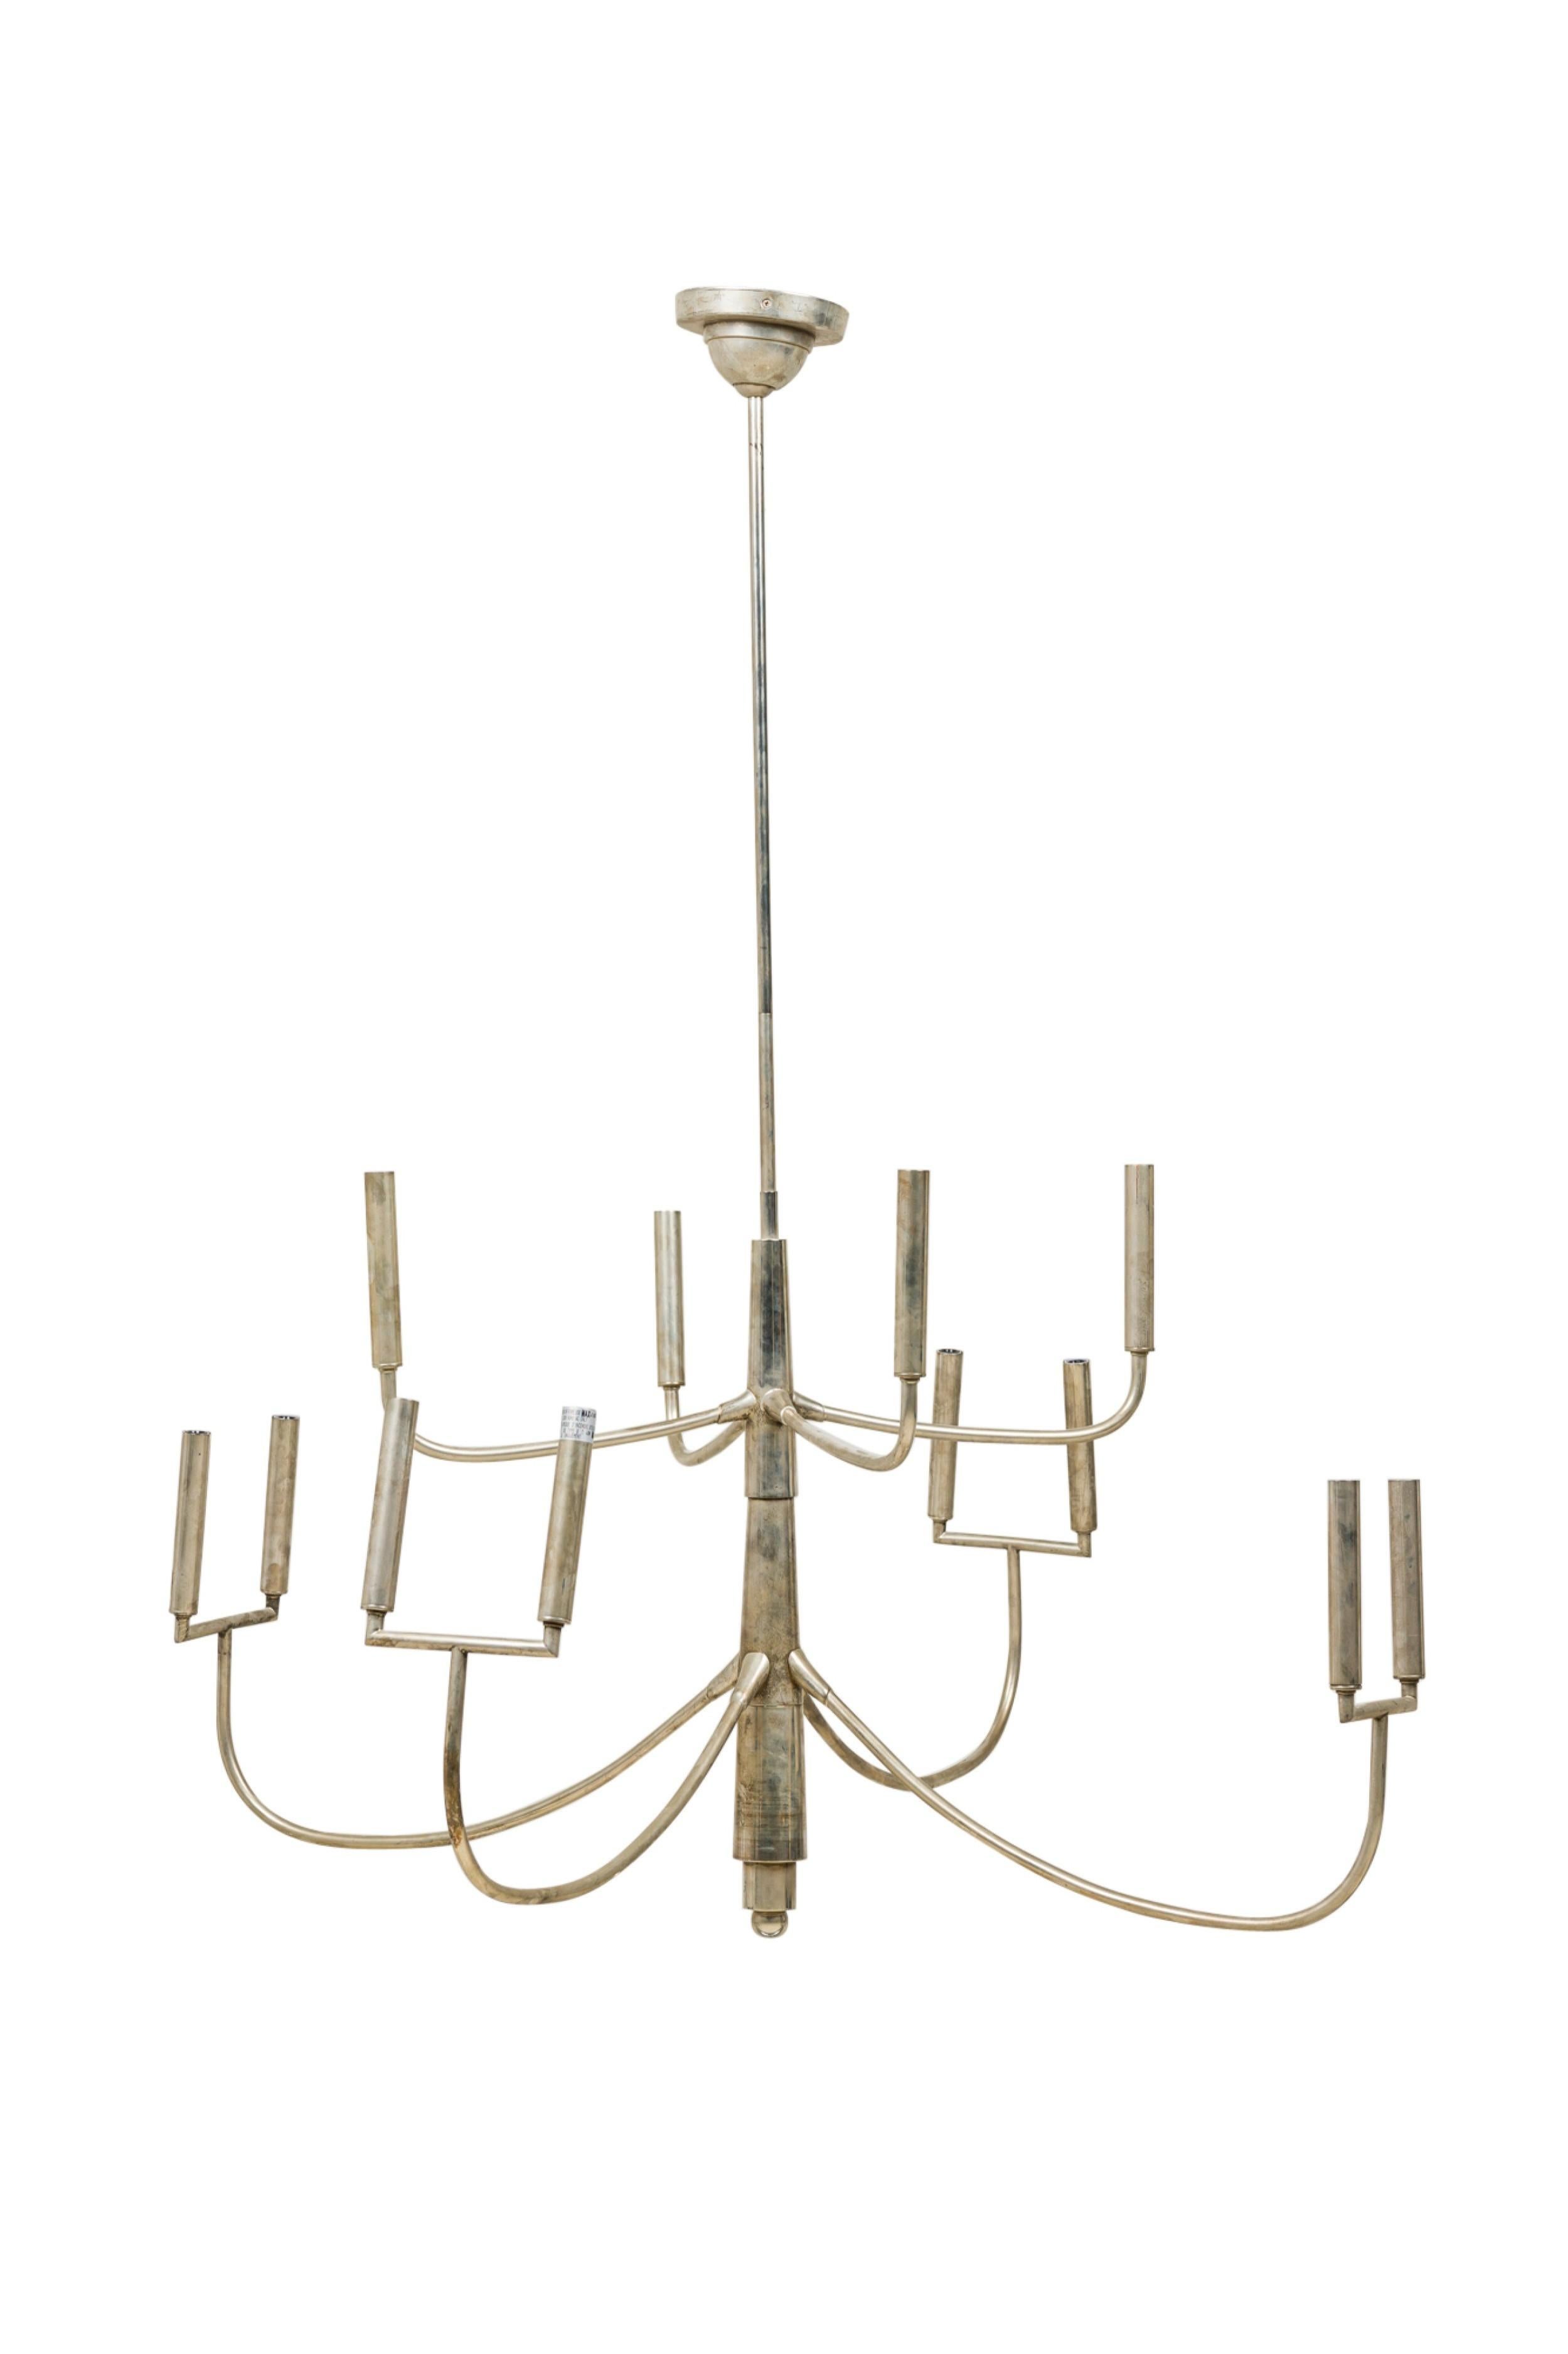 North American American Mid-Century 12 Light 8 Arm Polished Silver Chandelier For Sale